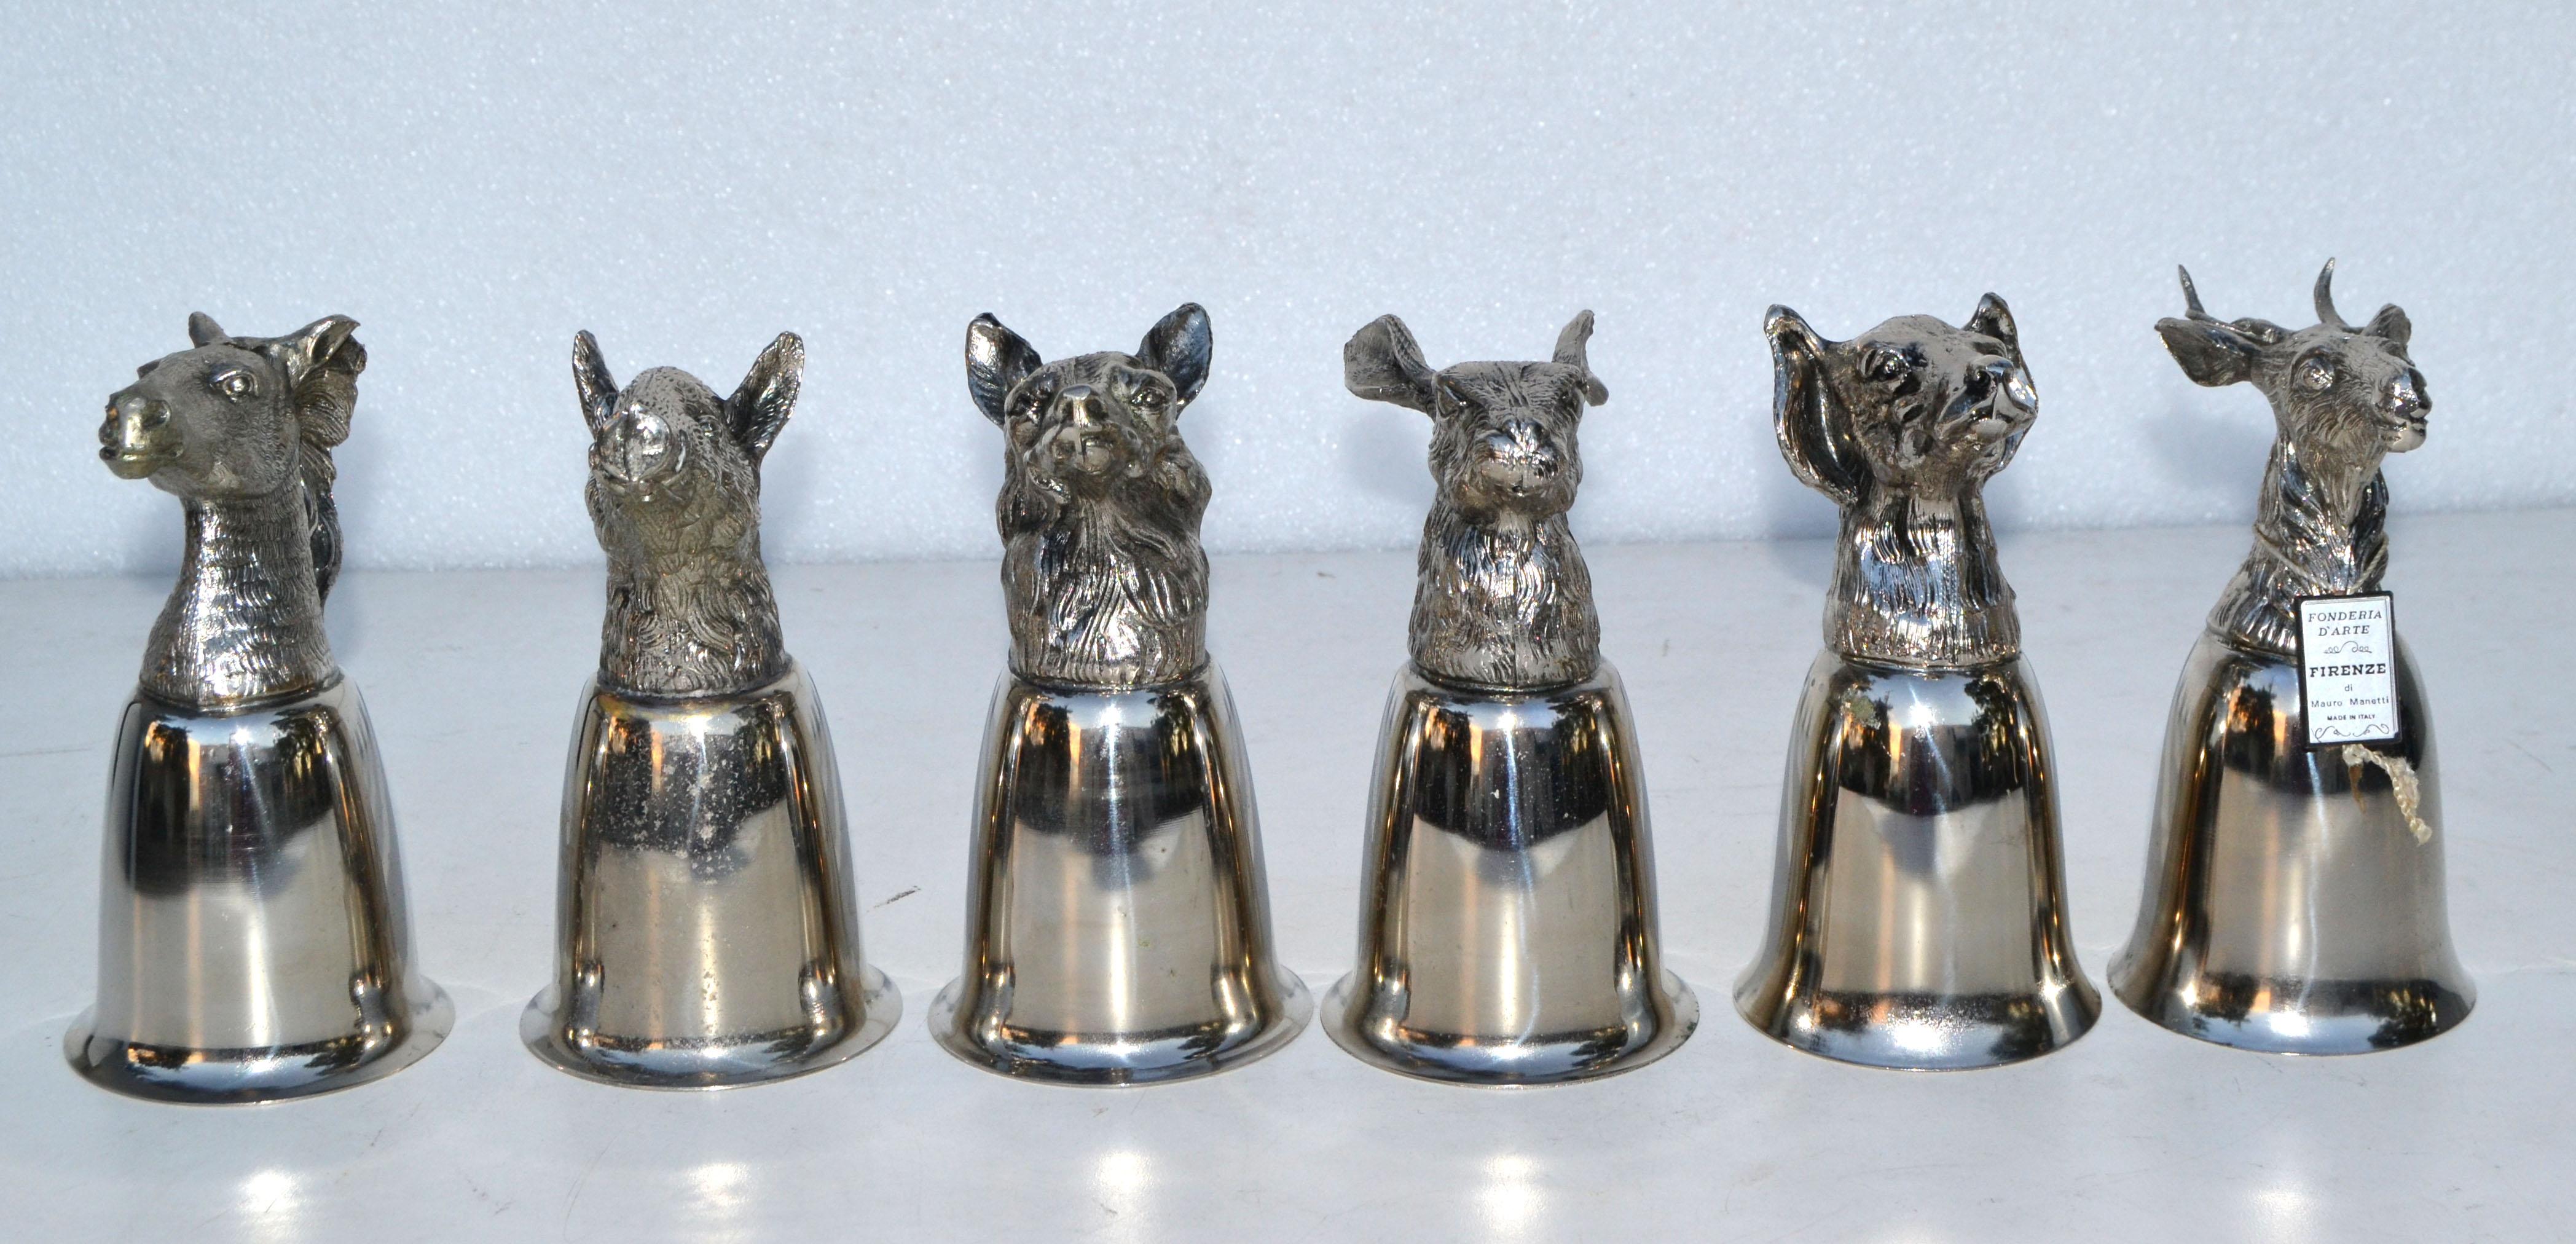 Six Mauro Manetti silver plate animal heads stirrup, goblets, cups, made in Italy.
We have the Hunting collection of a German shepherd, Labrador, deer, rabbit, donkey, boar.
All marked MM Italy & original tag included.